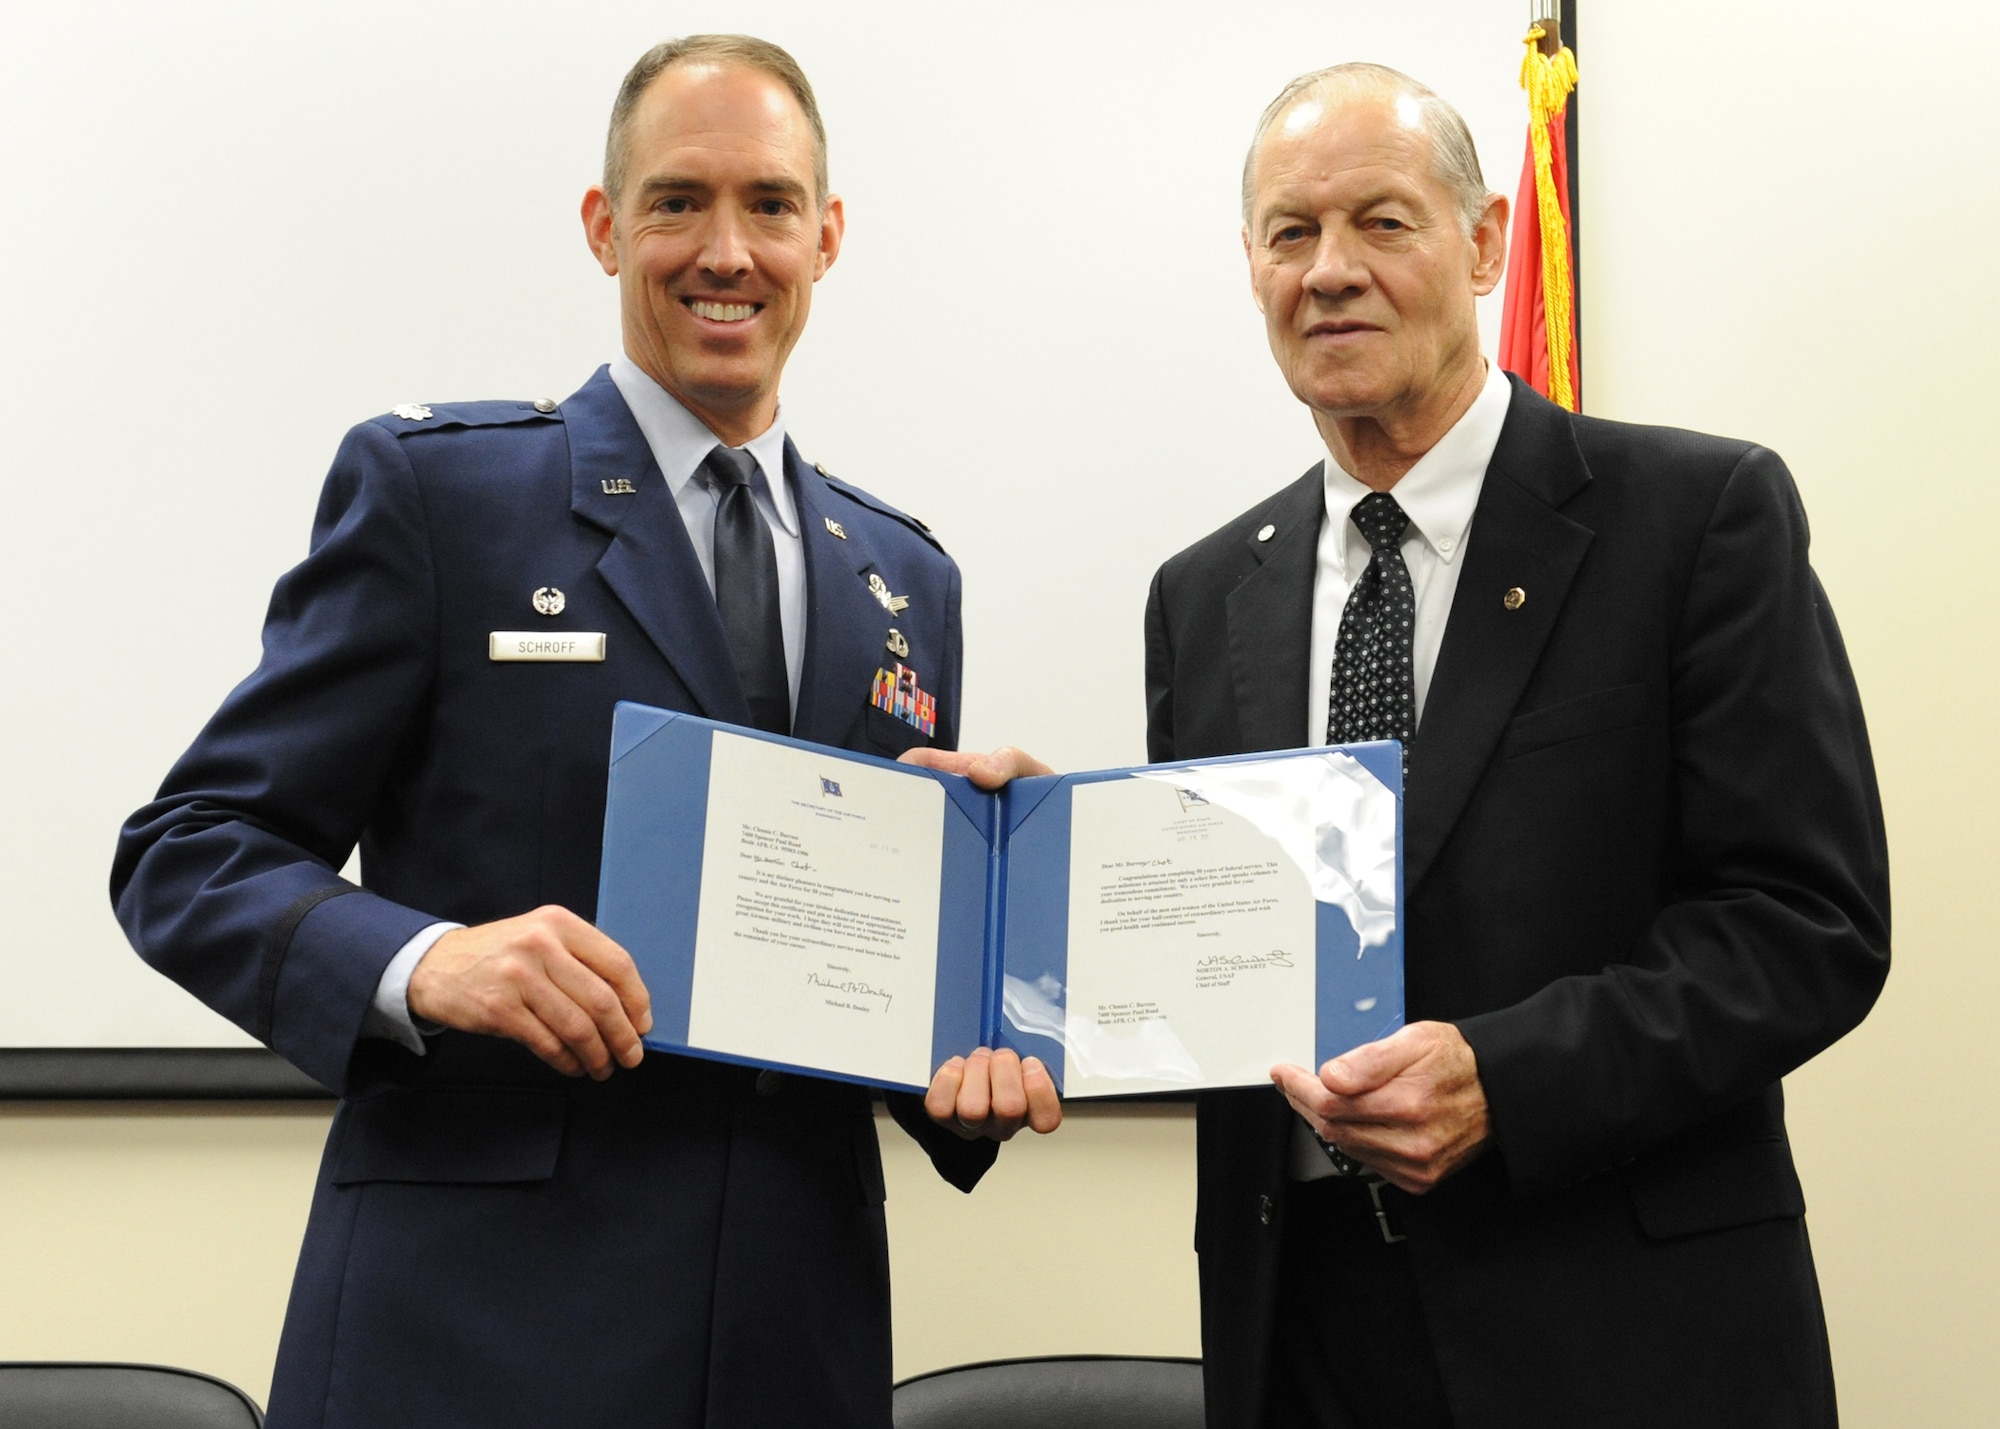 Lt. Col. Scott Schroff, 7th Space Warning Squadron commander, presents Chet Burress, 7th SWS ground radar systems analyst, letters from the Chief of Staff of the Air Force, Gen. Norton A. Schwartz and Chief Master Sgt. of the Air Force James A. Roy at a ceremony April 26 at Beale Air Force Base, Calif. Burress received numerous awards for his 50 years of federal service. (U.S. Air Force photo by Mr. John Schwab)